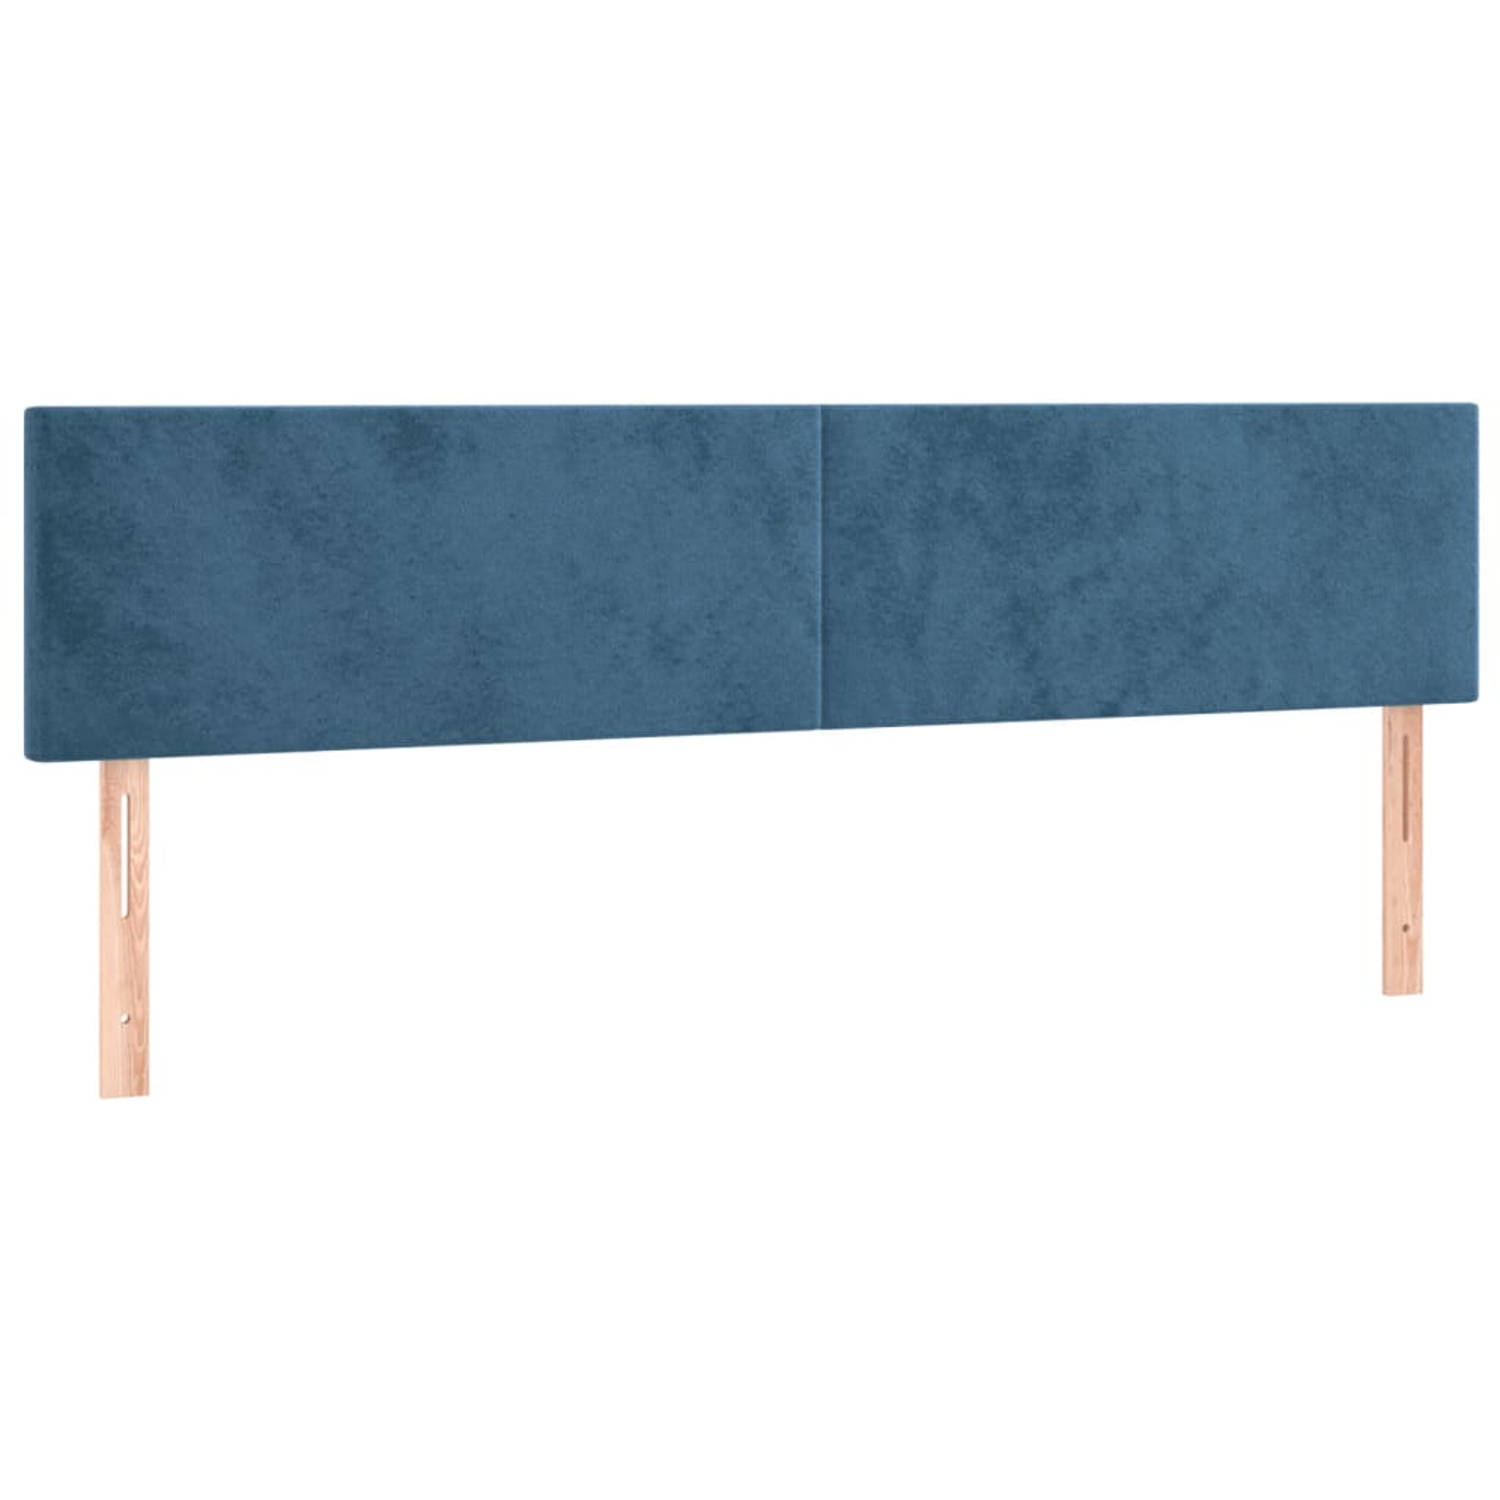 The Living Store Hoofdeind - The Living Store - Bedaccessoires - 160x5x78/88 cm - Donkerblauw